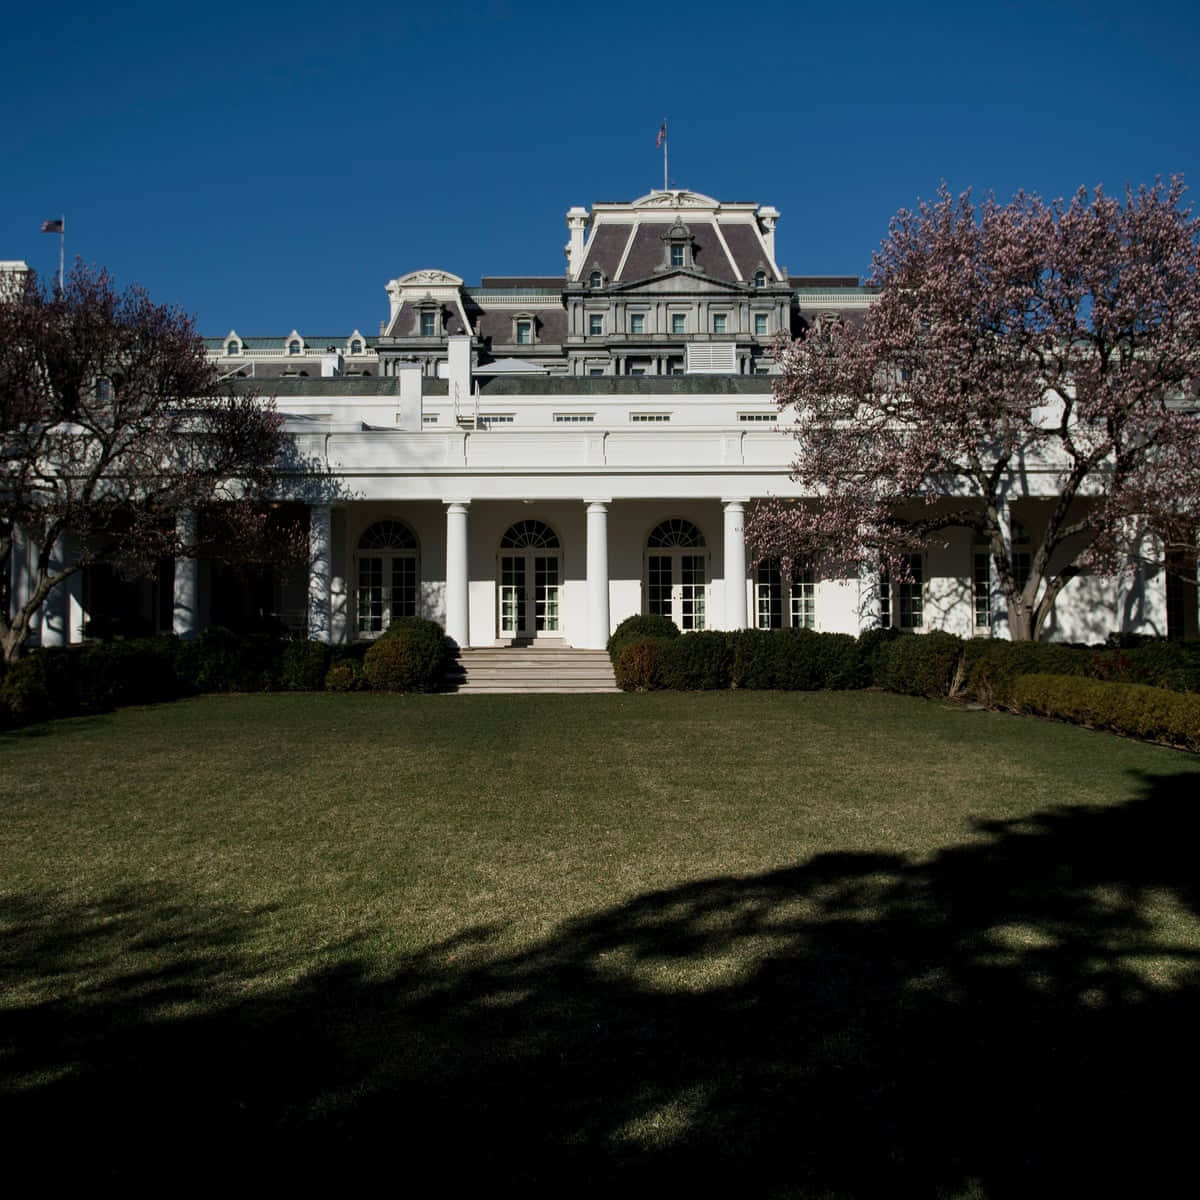 The White House Is Surrounded By Trees And Flowers